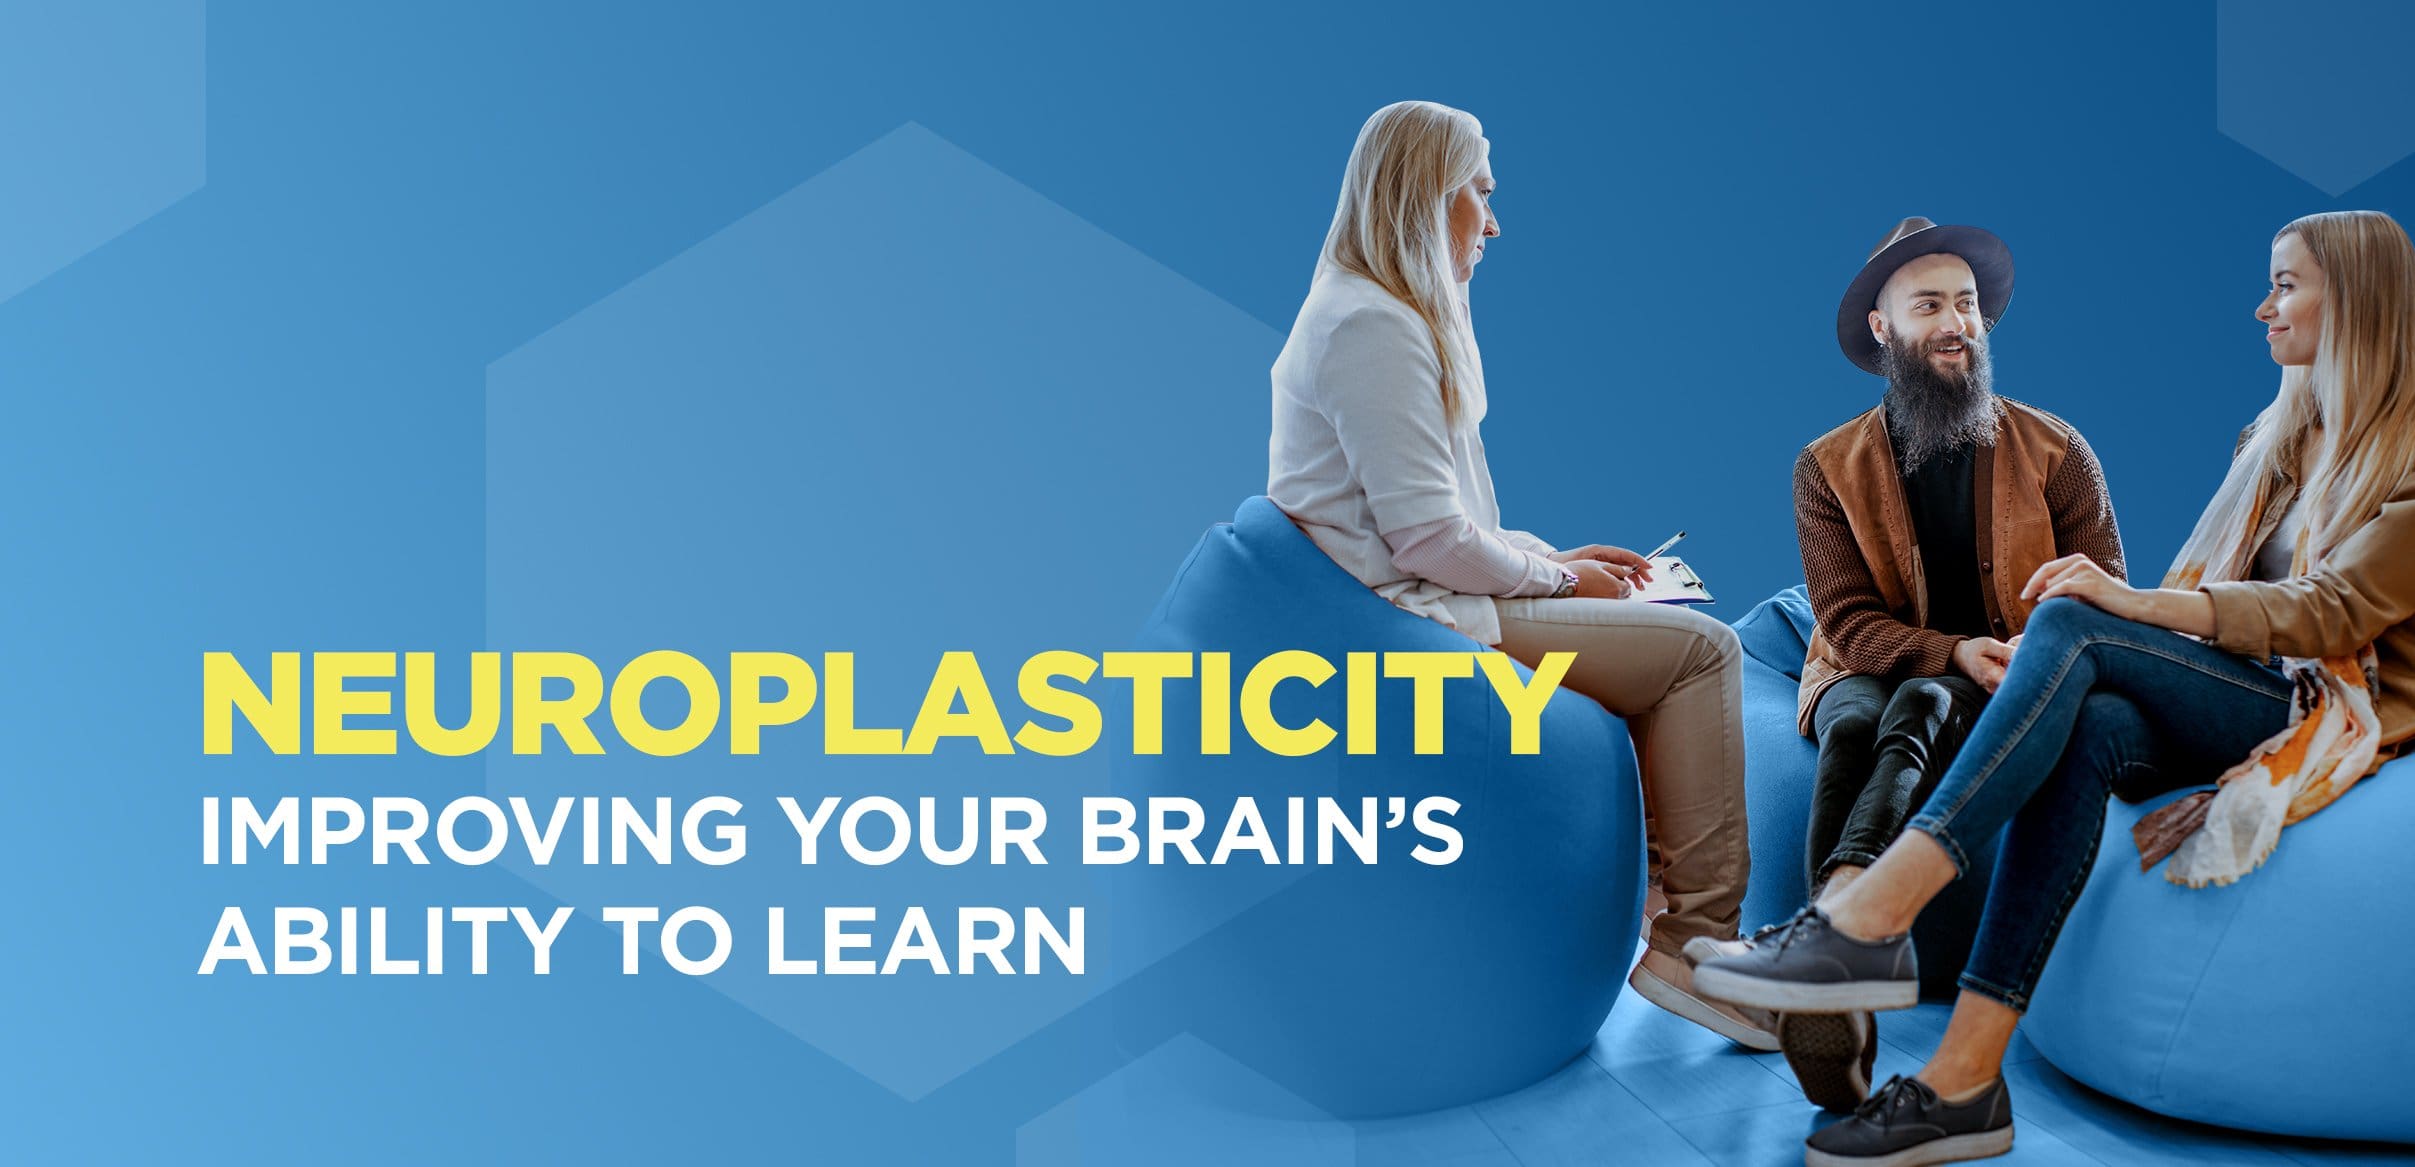 Neuroplasticity – Improving Your Brain’s Ability to Learn